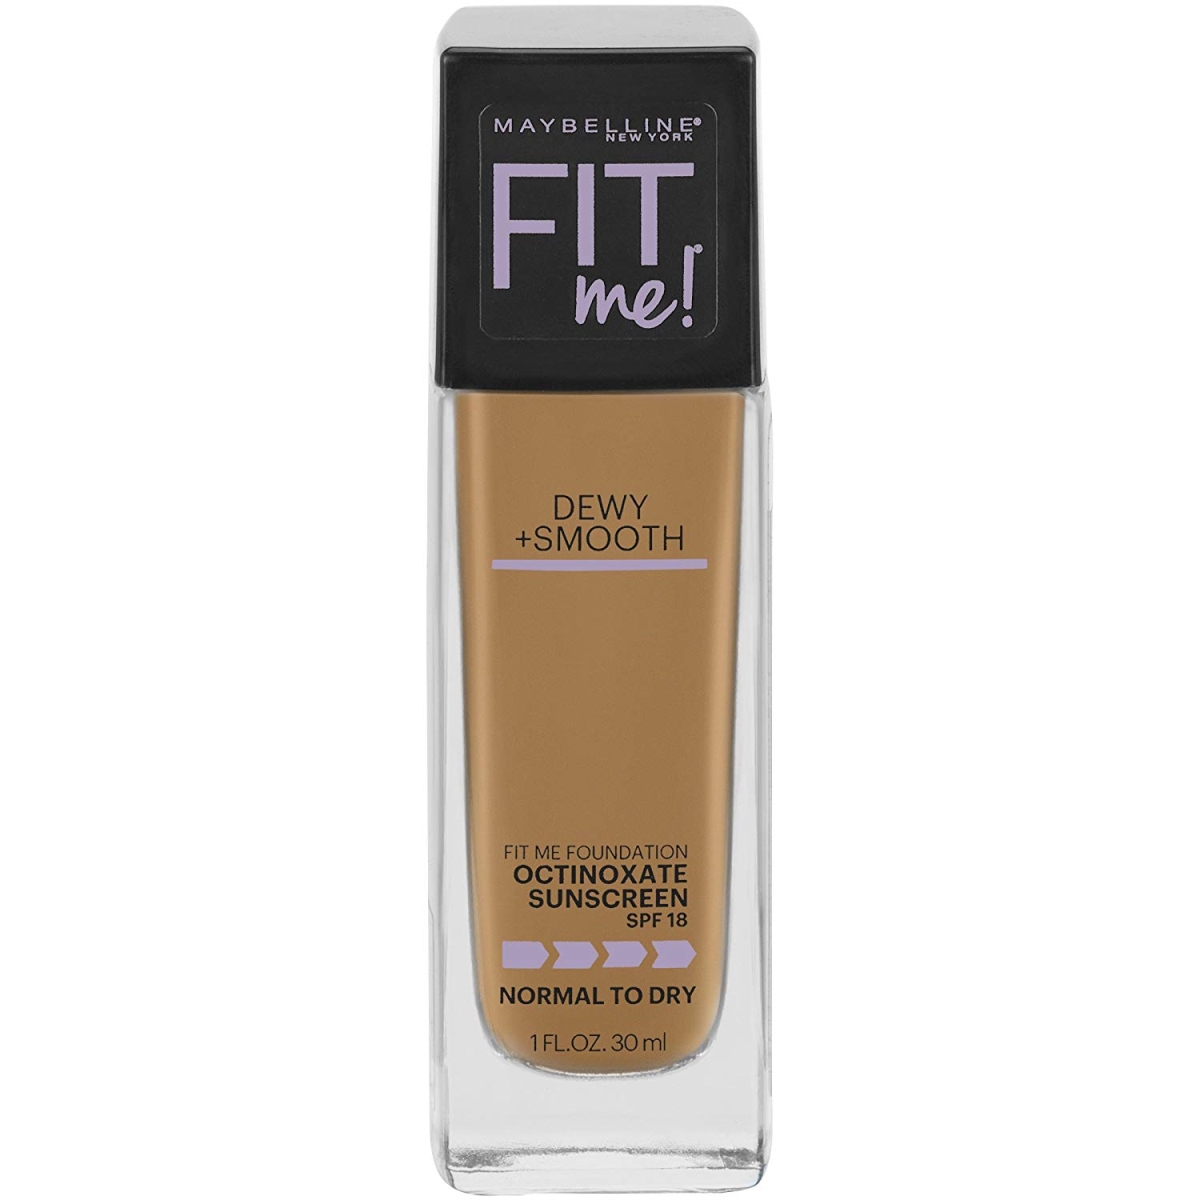 7712413 Fit Me Dewy Plus Smooth Foundation, 322 Warm Honey - Pack Of 2